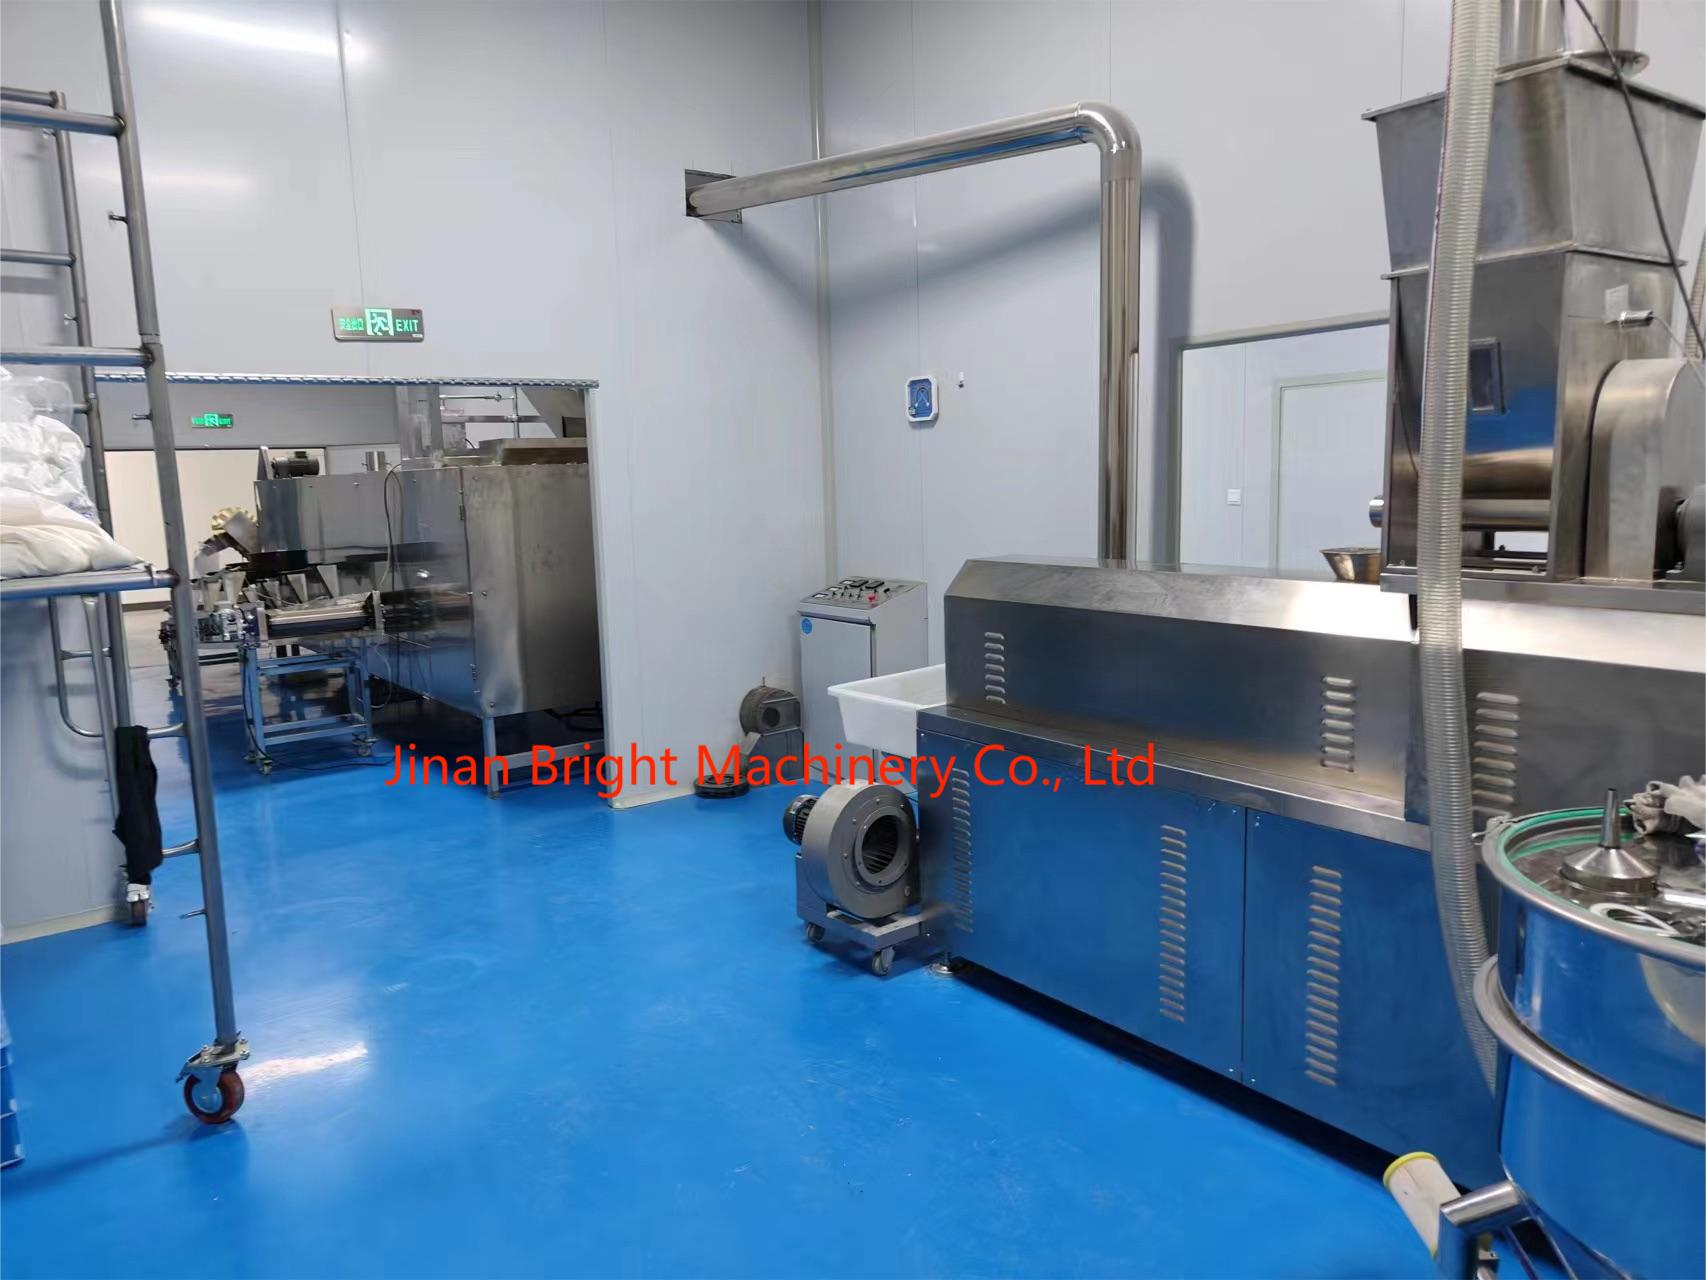 Nutritional Powder Production Line Completed Installation